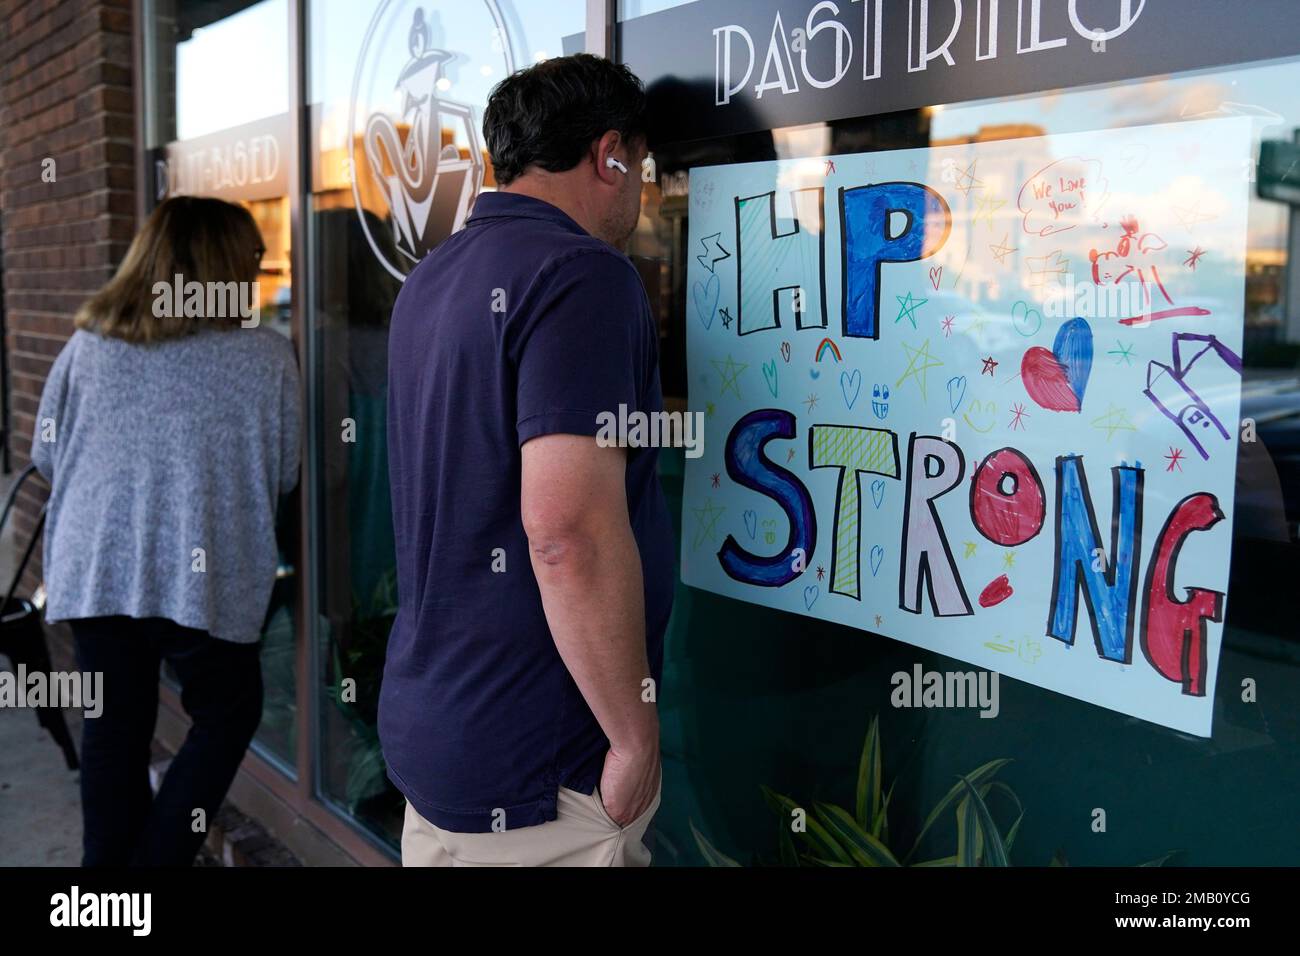 A sign about HP strong is displayed as people look through a window of Madame Zuzus, Wednesday, July 27, 2022, in Highland Park, Ill